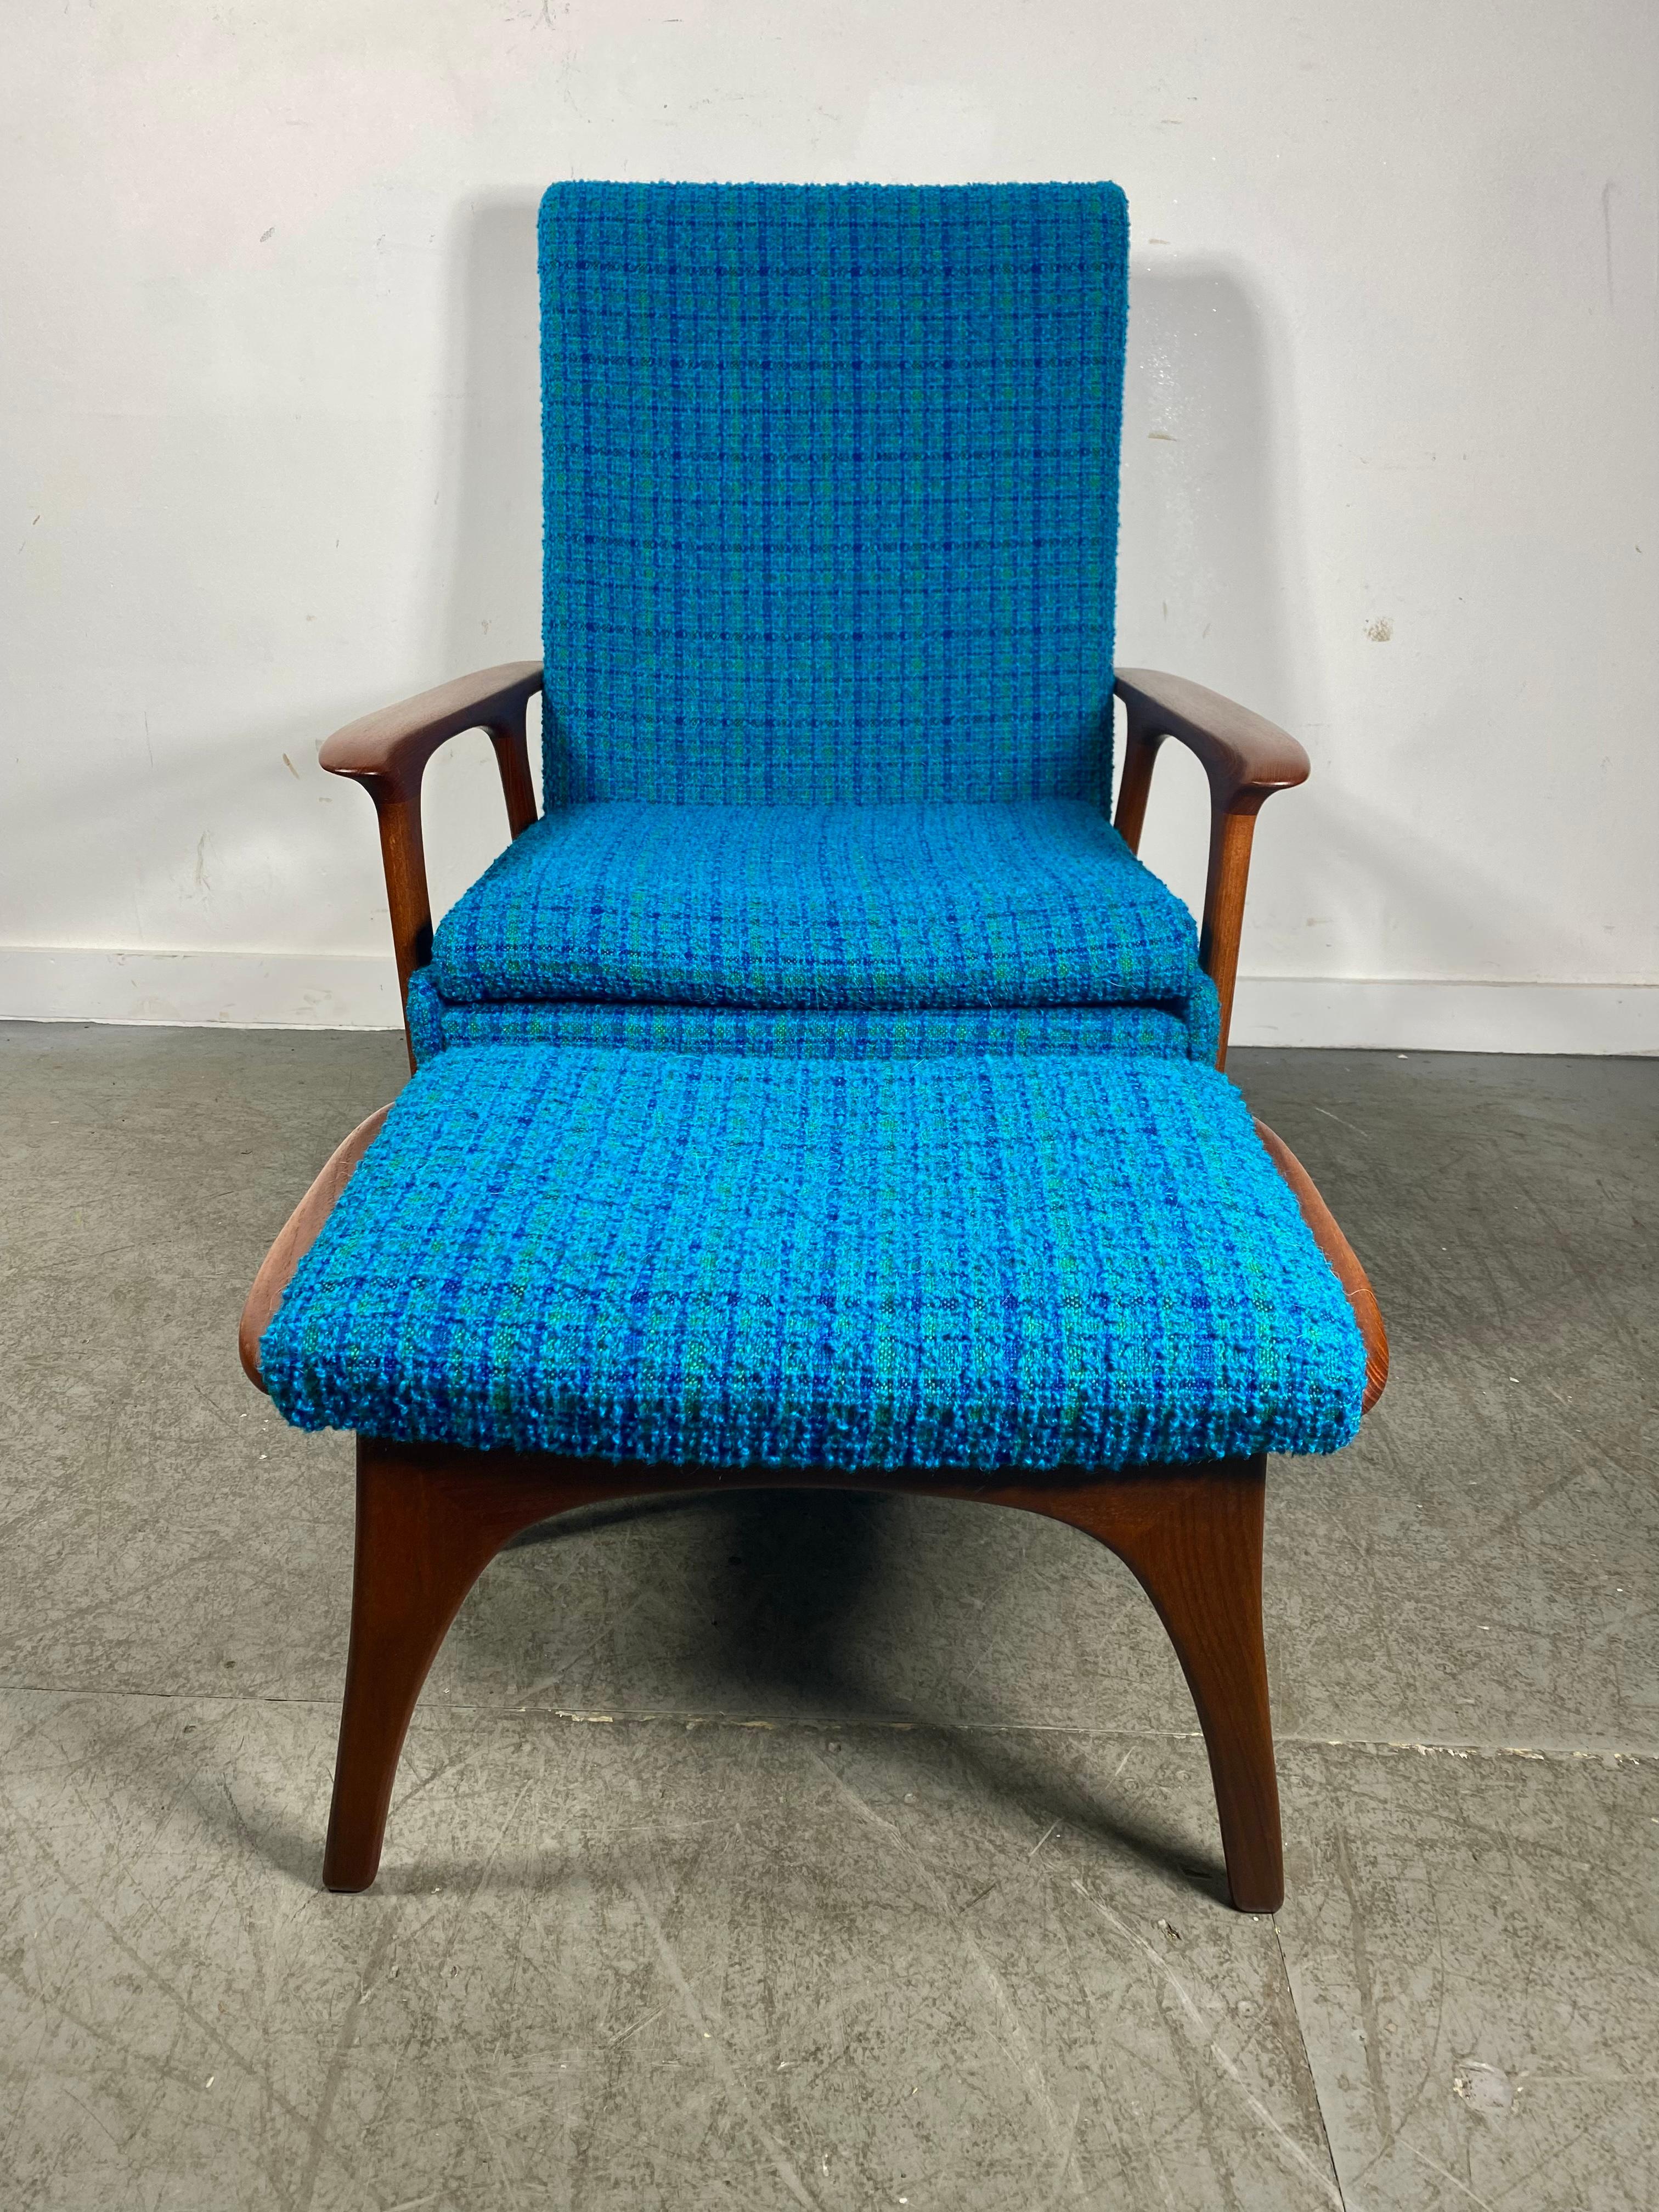 
Classic Scandinavian Modern Teak Lounge Chair and Ottoman, manner Of Hans Wegner. Superior quality and construction.Classic ,sleek deign. Retains original Electric Blue wool fabric upholstery in excellent original condition. interior seat cushion